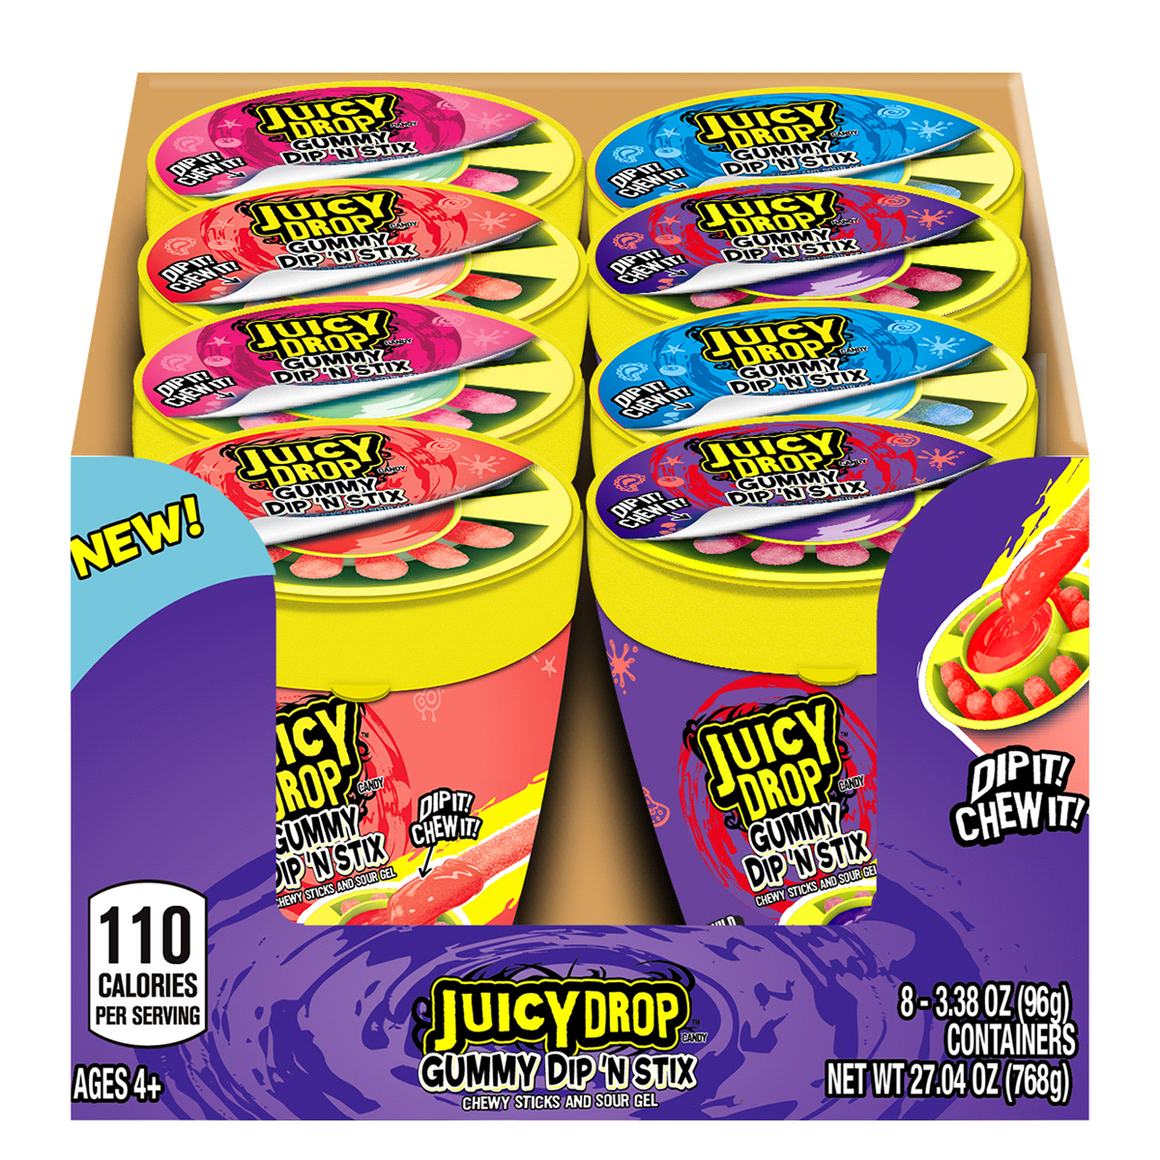 All City Candy Juicy Drop Gummy Dip 'N Stix Novelty Bazooka Candy Brands For fresh candy and great service, visit www.allcitycandy.com